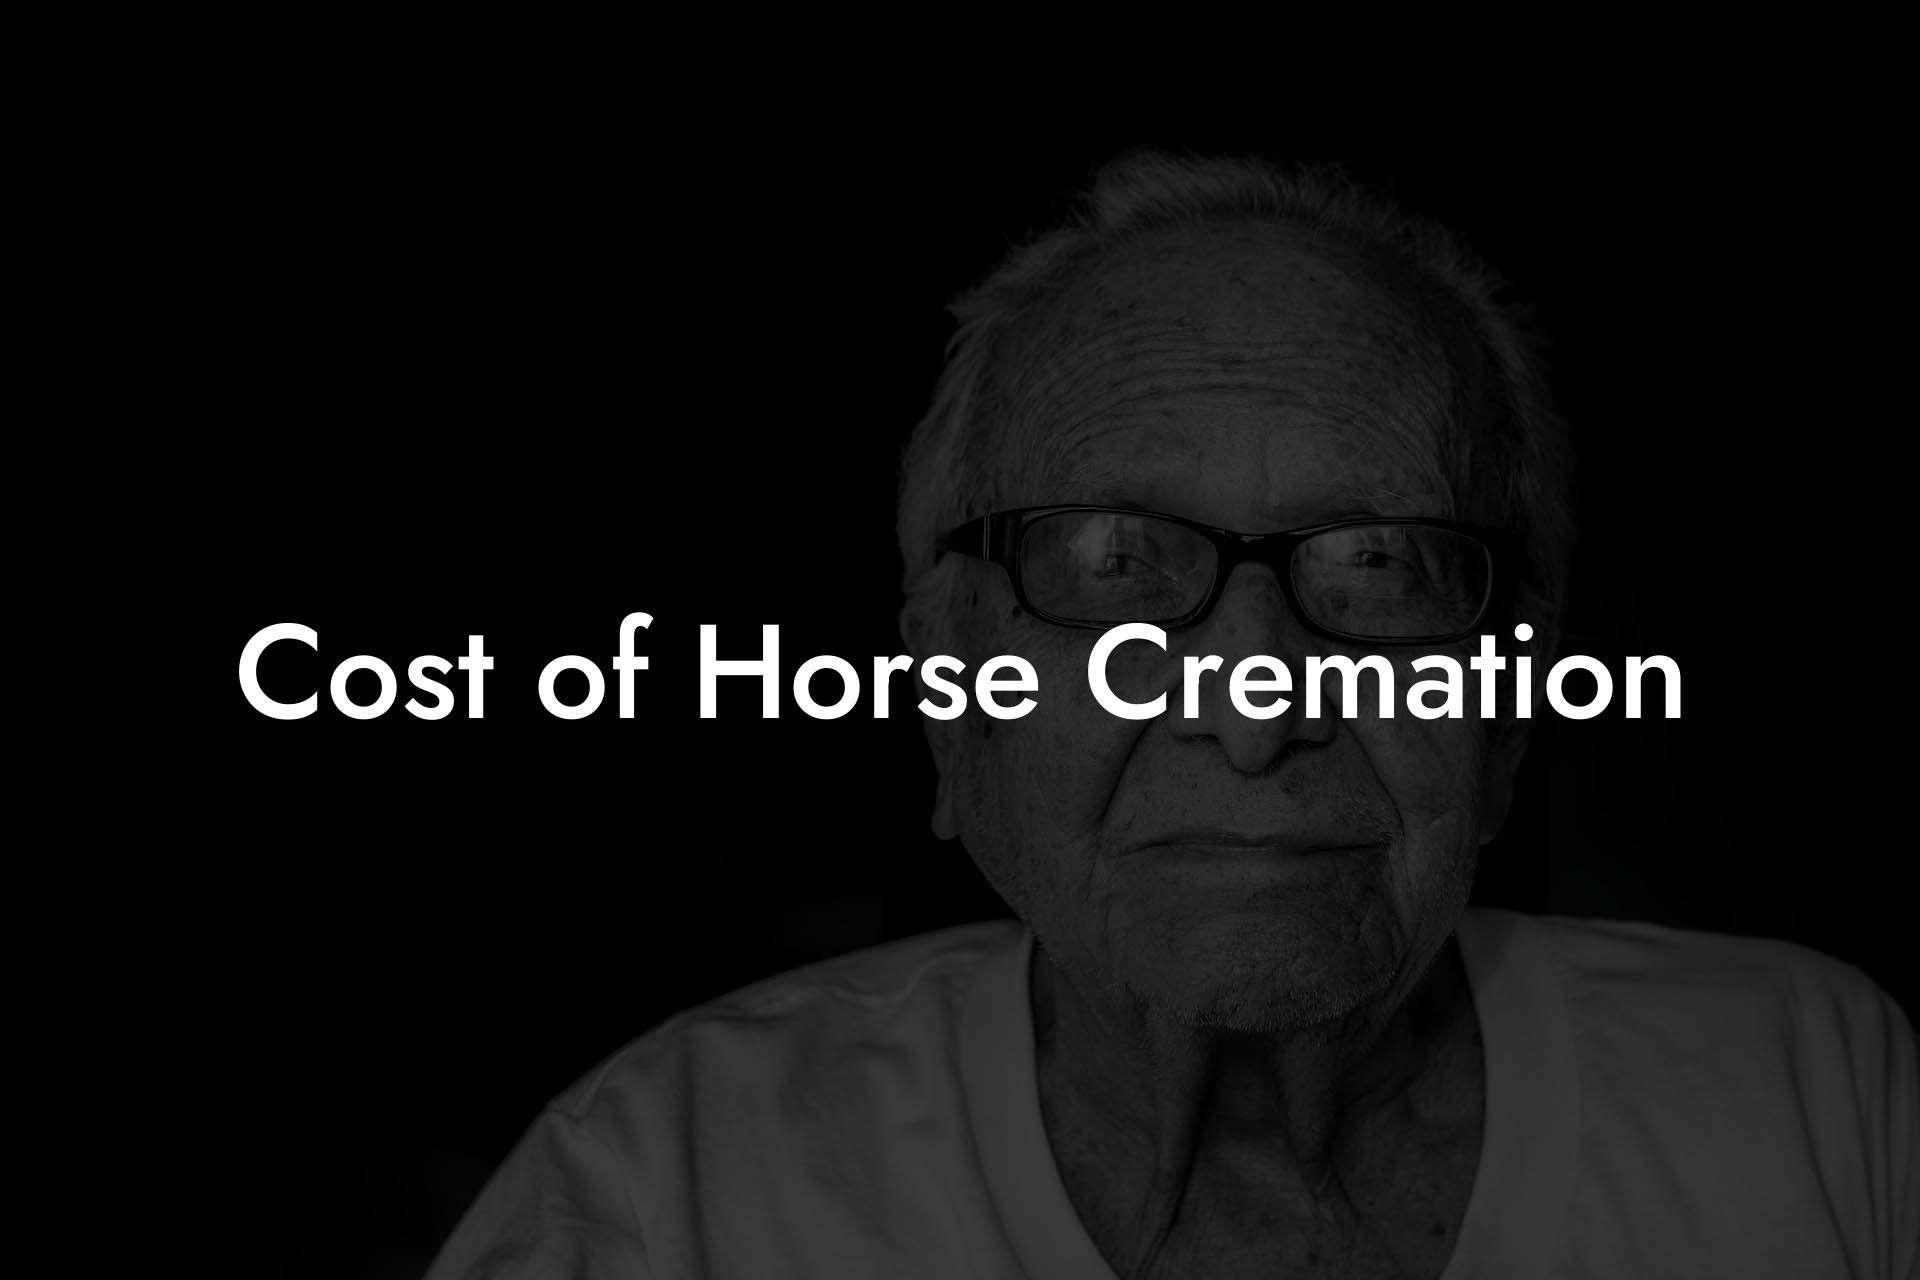 Cost of Horse Cremation